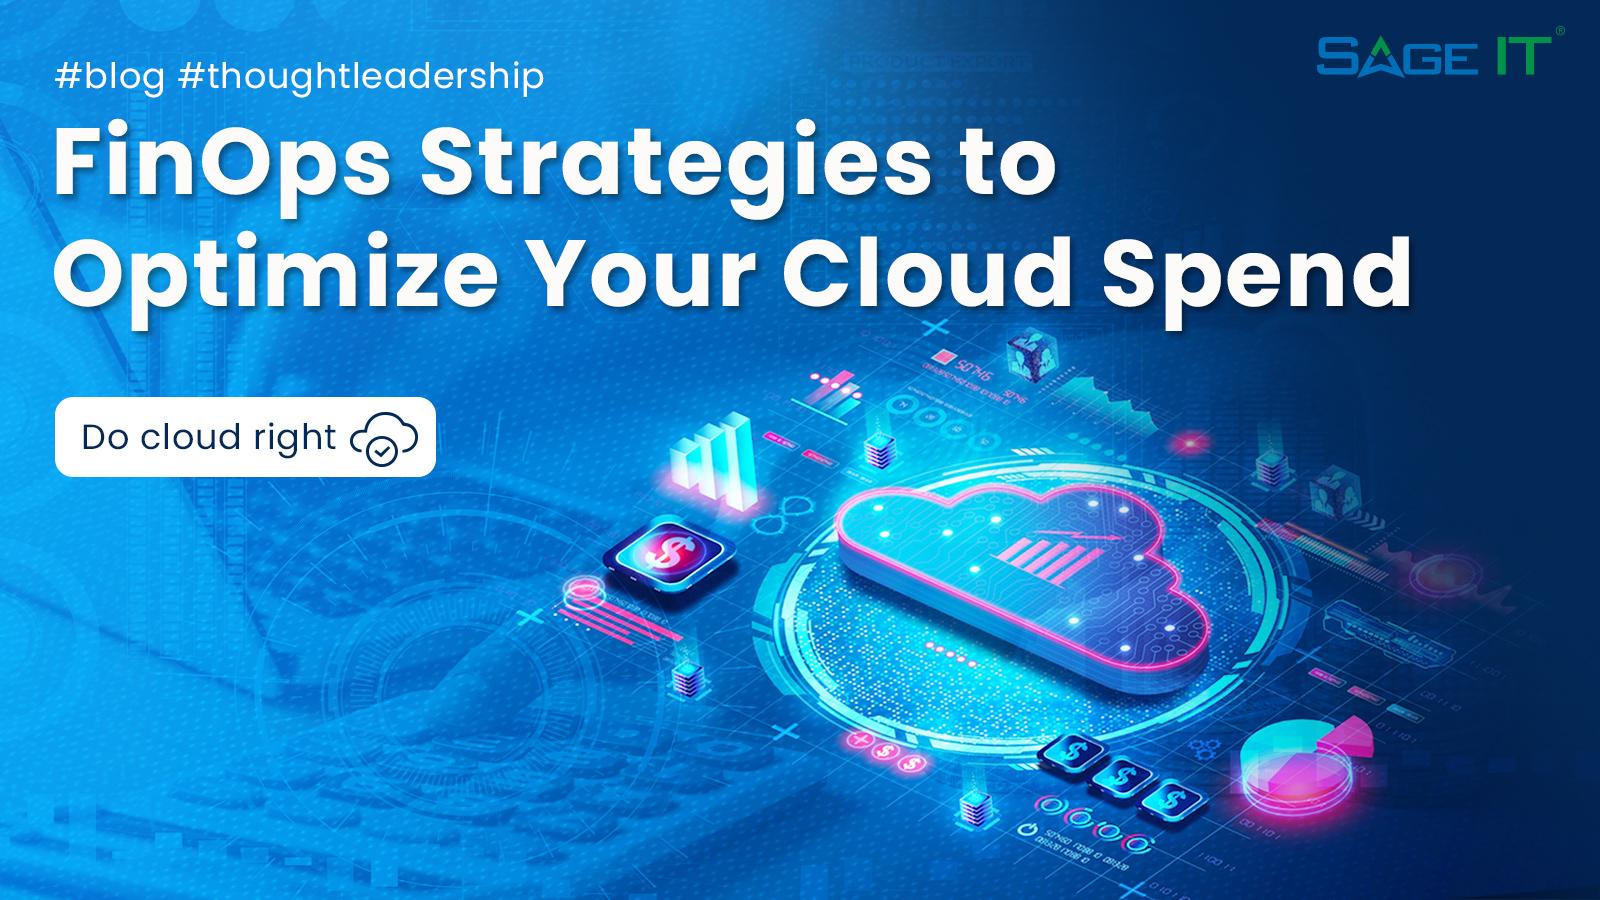 This banner image illustrates 5 cloud finops strategies to optimize your cloud spend.